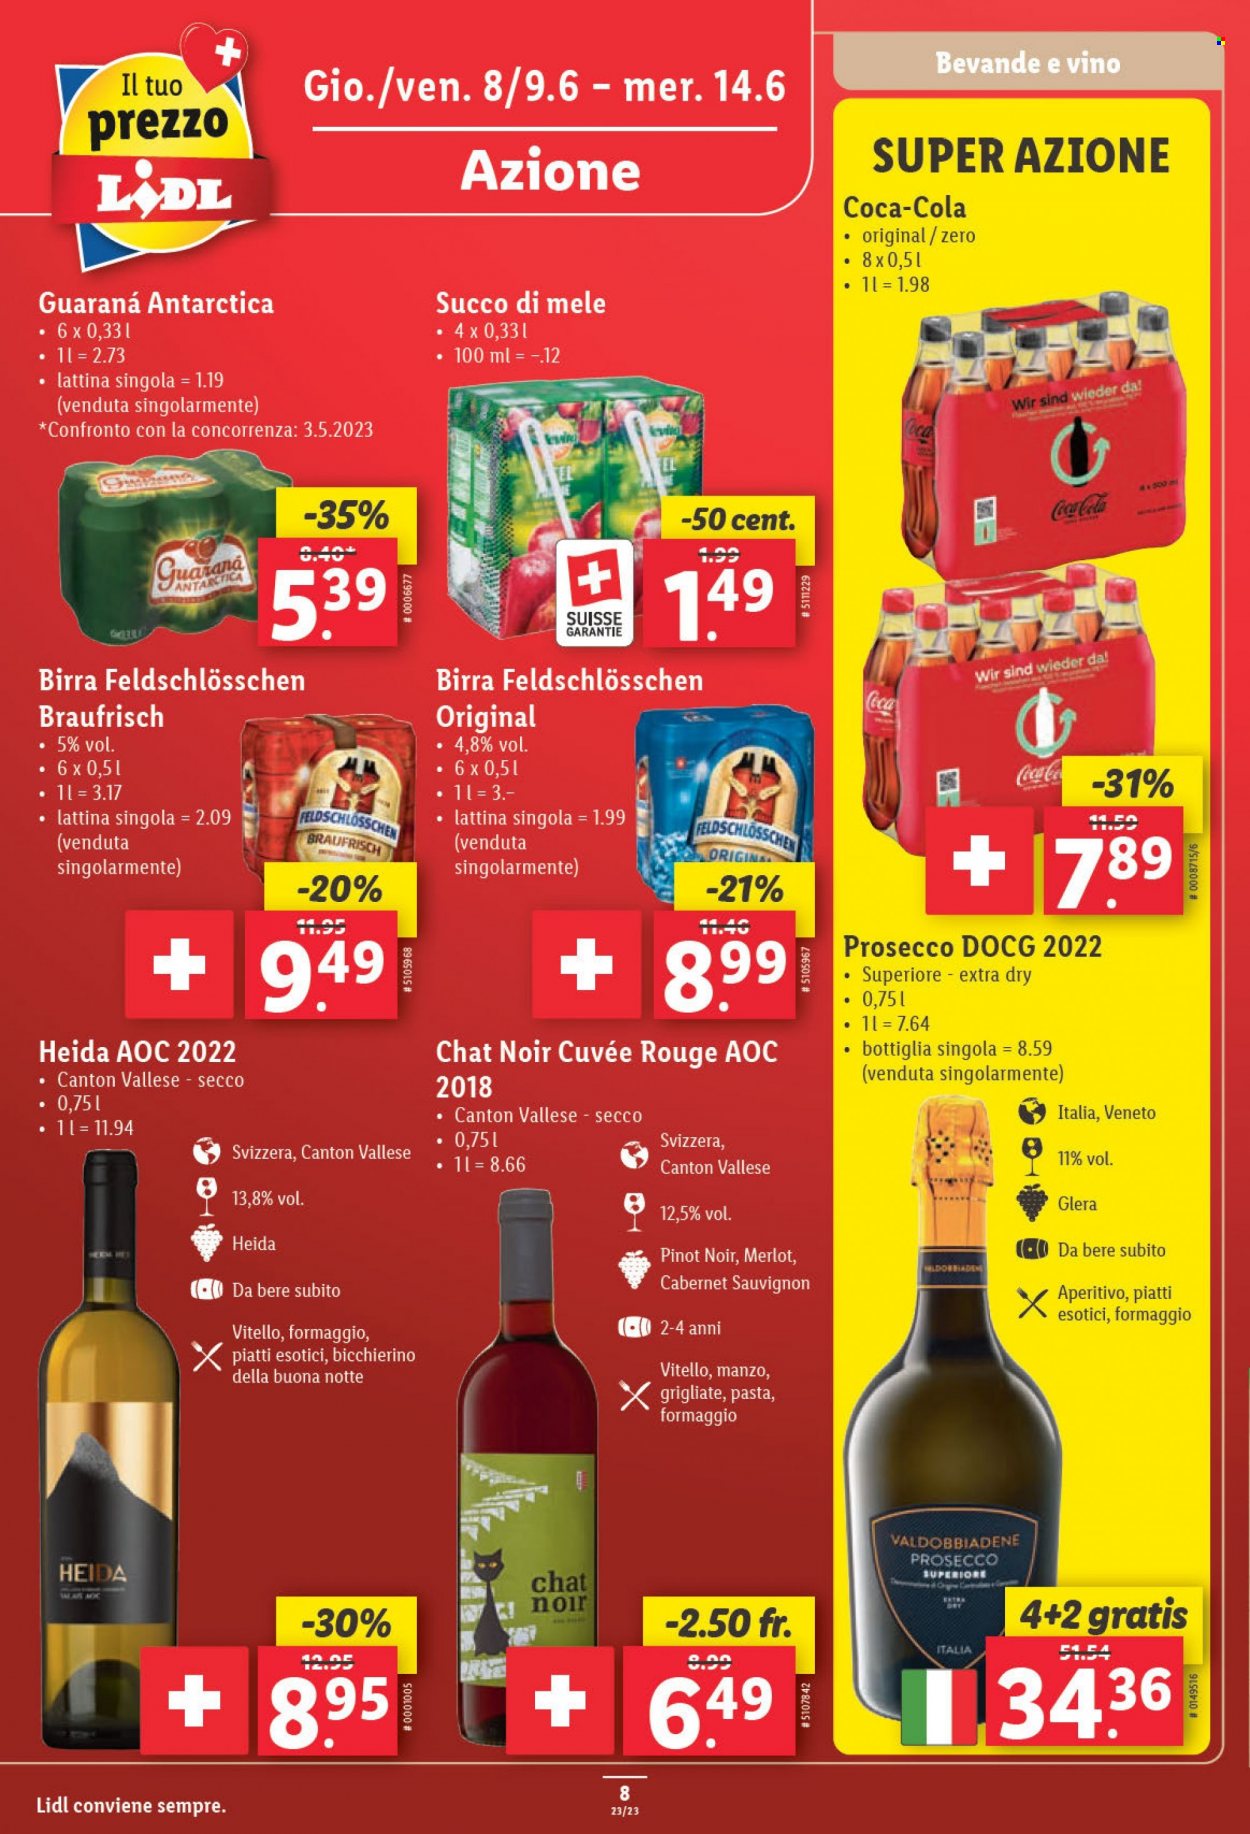 Catalogue Lidl - 8.6.2023 - 14.6.2023. Page 8.